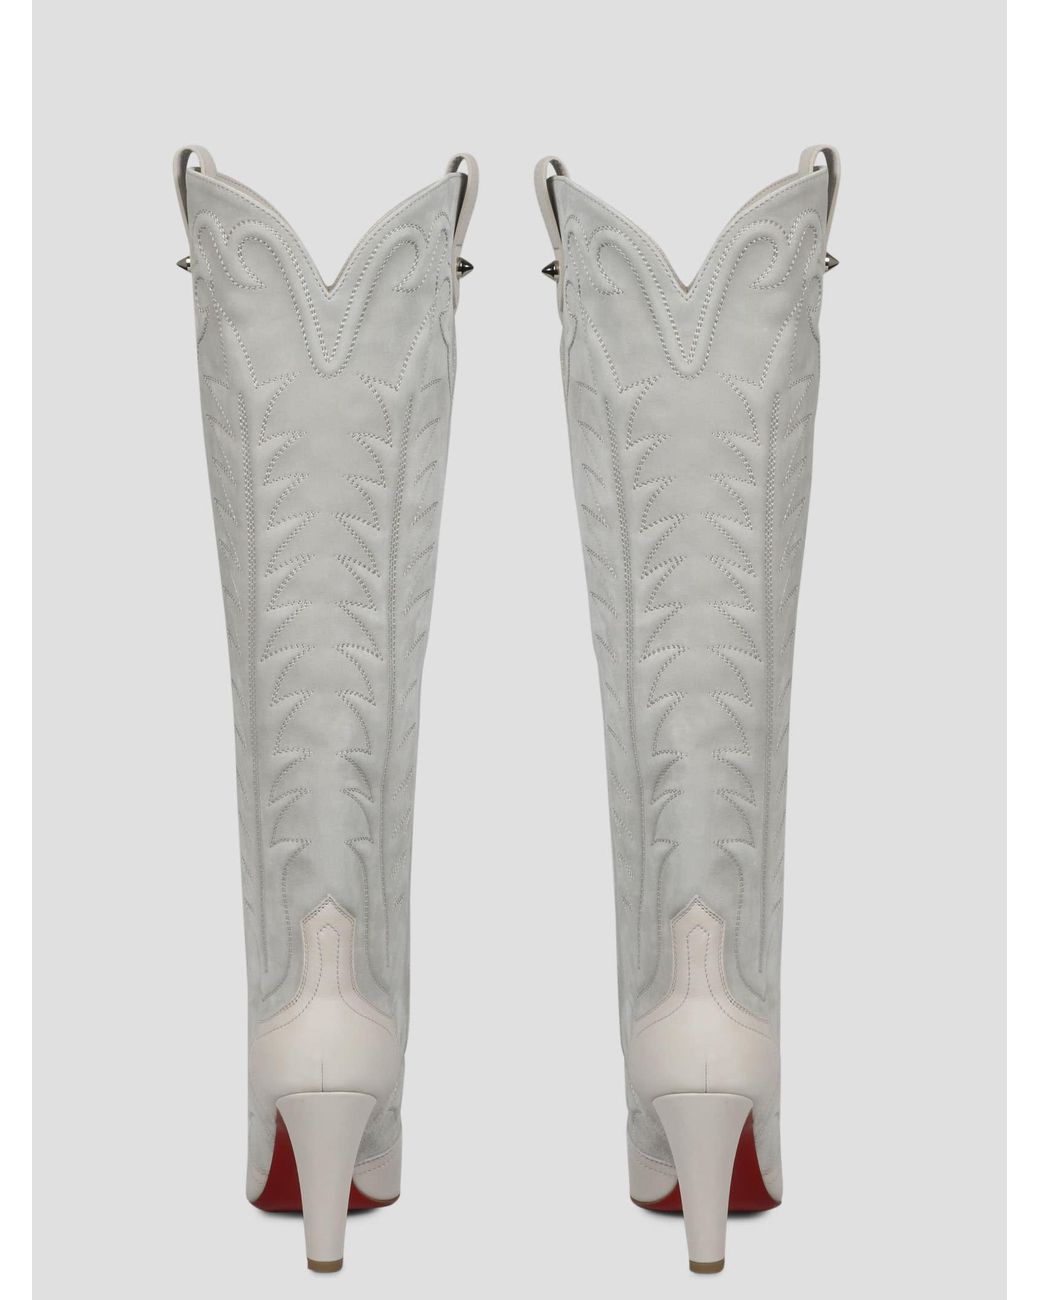 CHRISTIAN LOUBOUTIN Botta Leather Knee-high Boots We